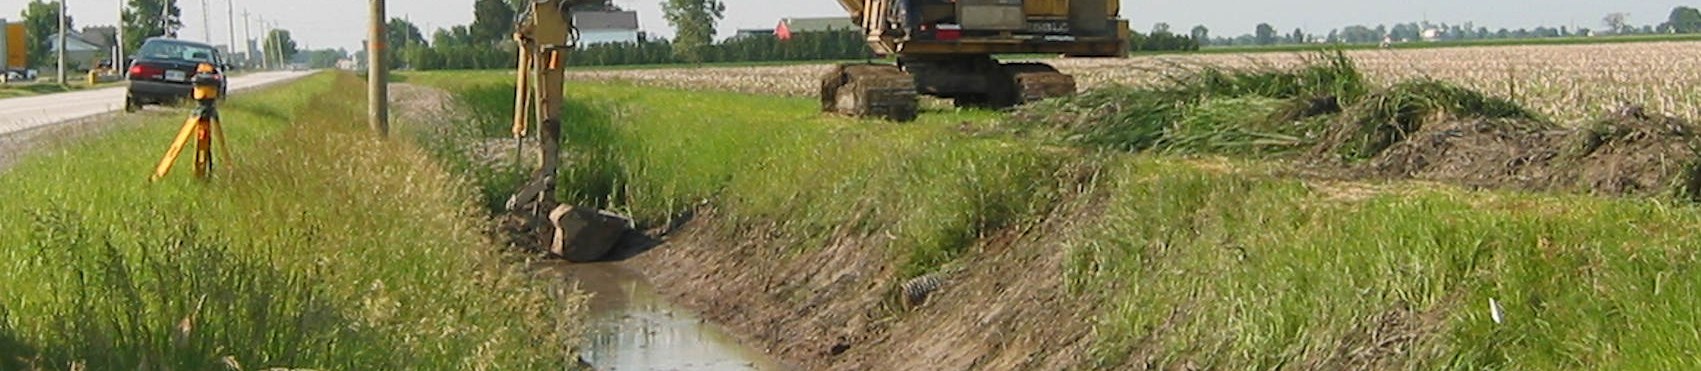 municipal drain being maintained